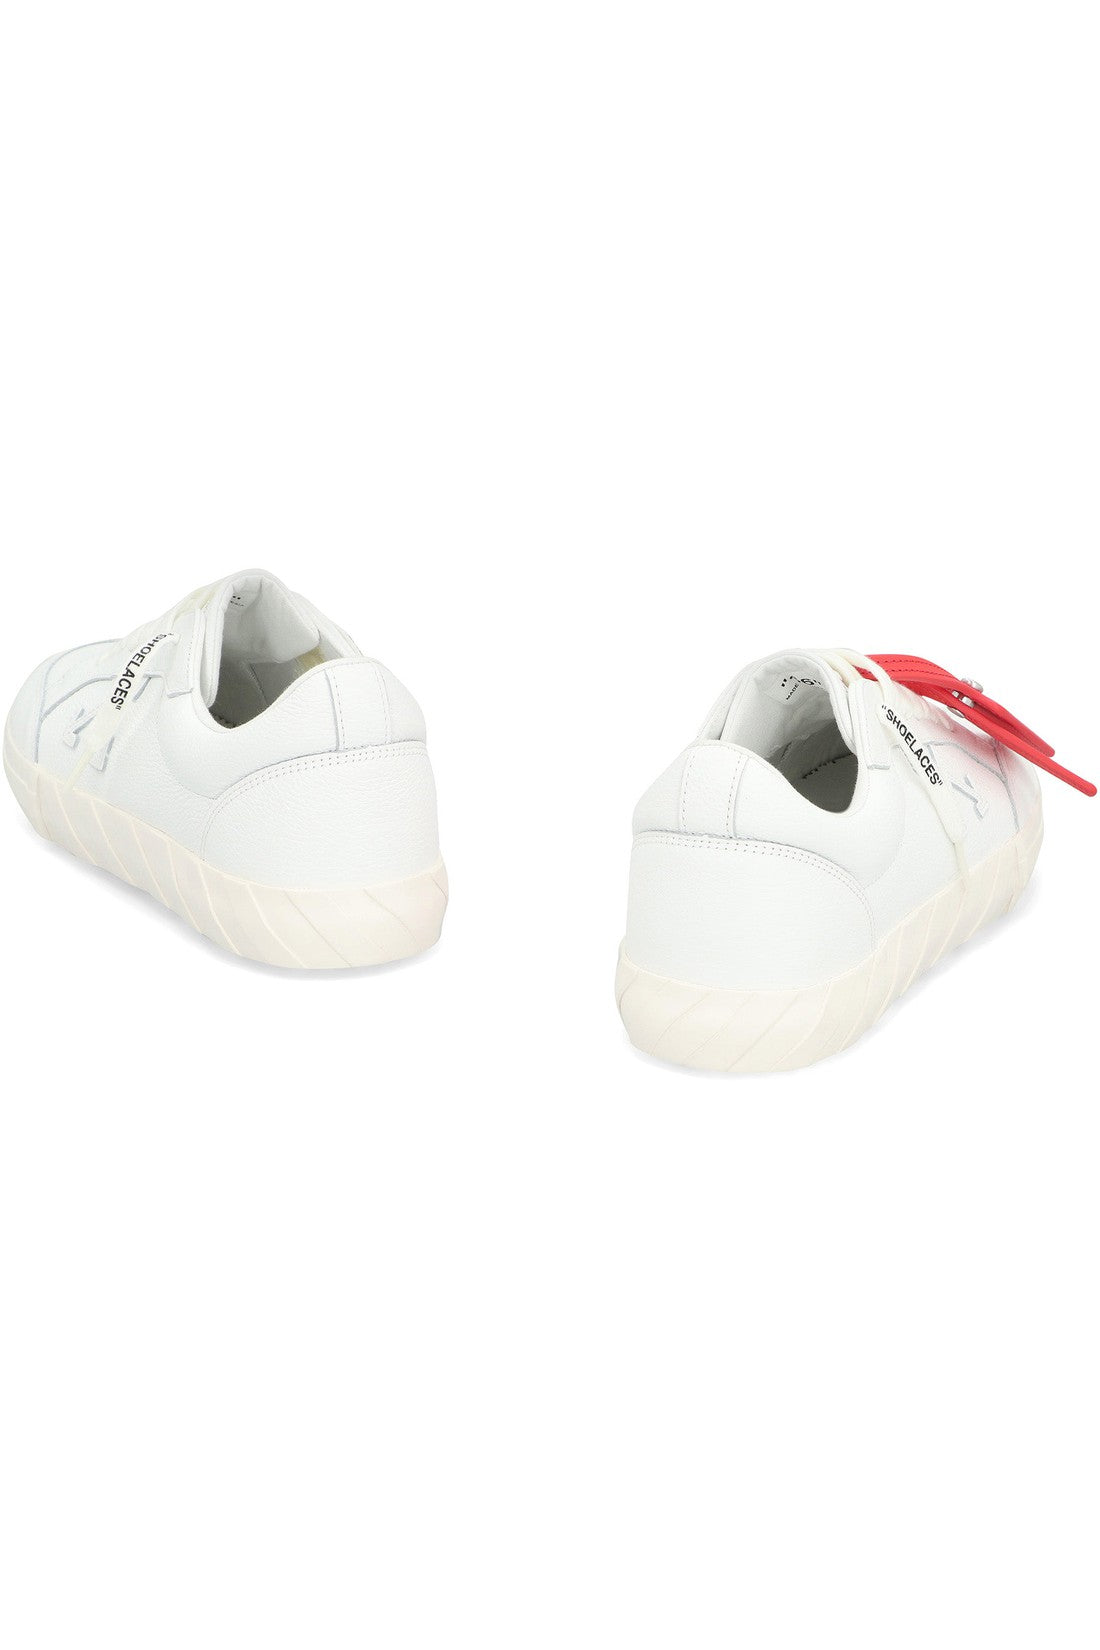 Off-White-OUTLET-SALE-Vulcanized leather low-top sneakers-ARCHIVIST